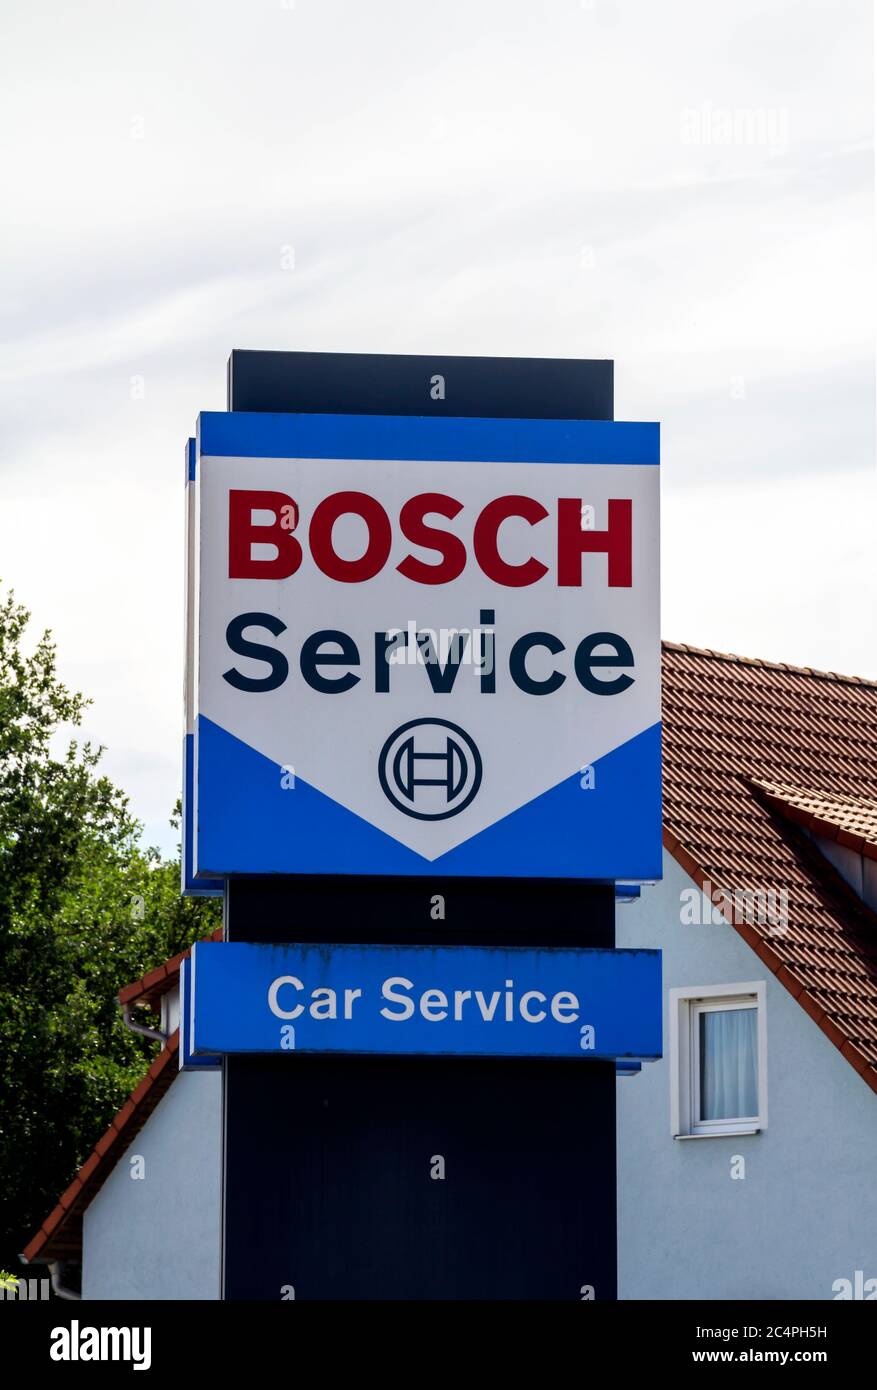 Bosch Car Service High Resolution Stock Photography and Images - Alamy